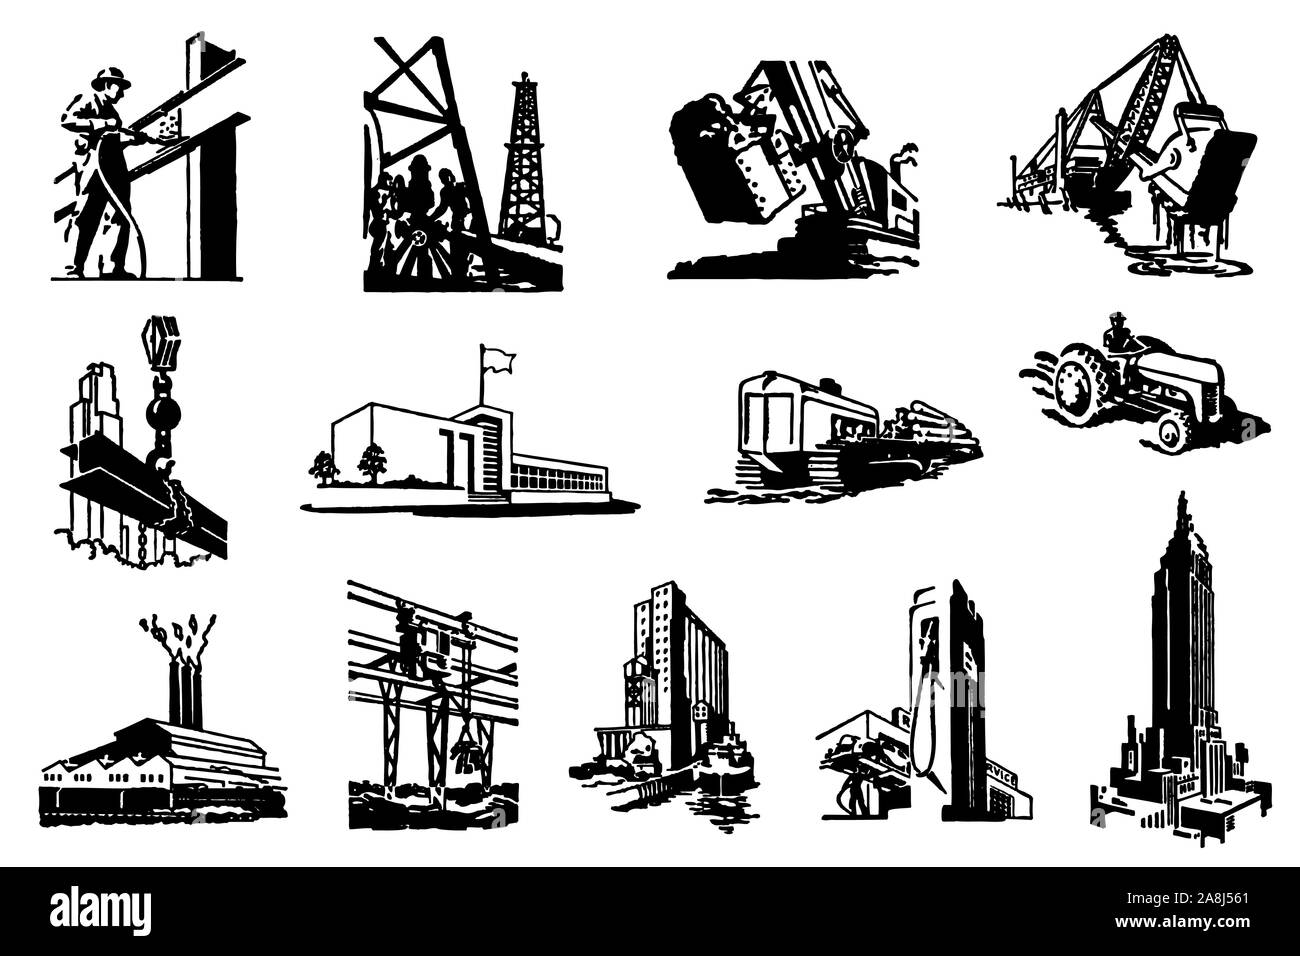 Set of historical industrial pictograms or icons Stock Vector